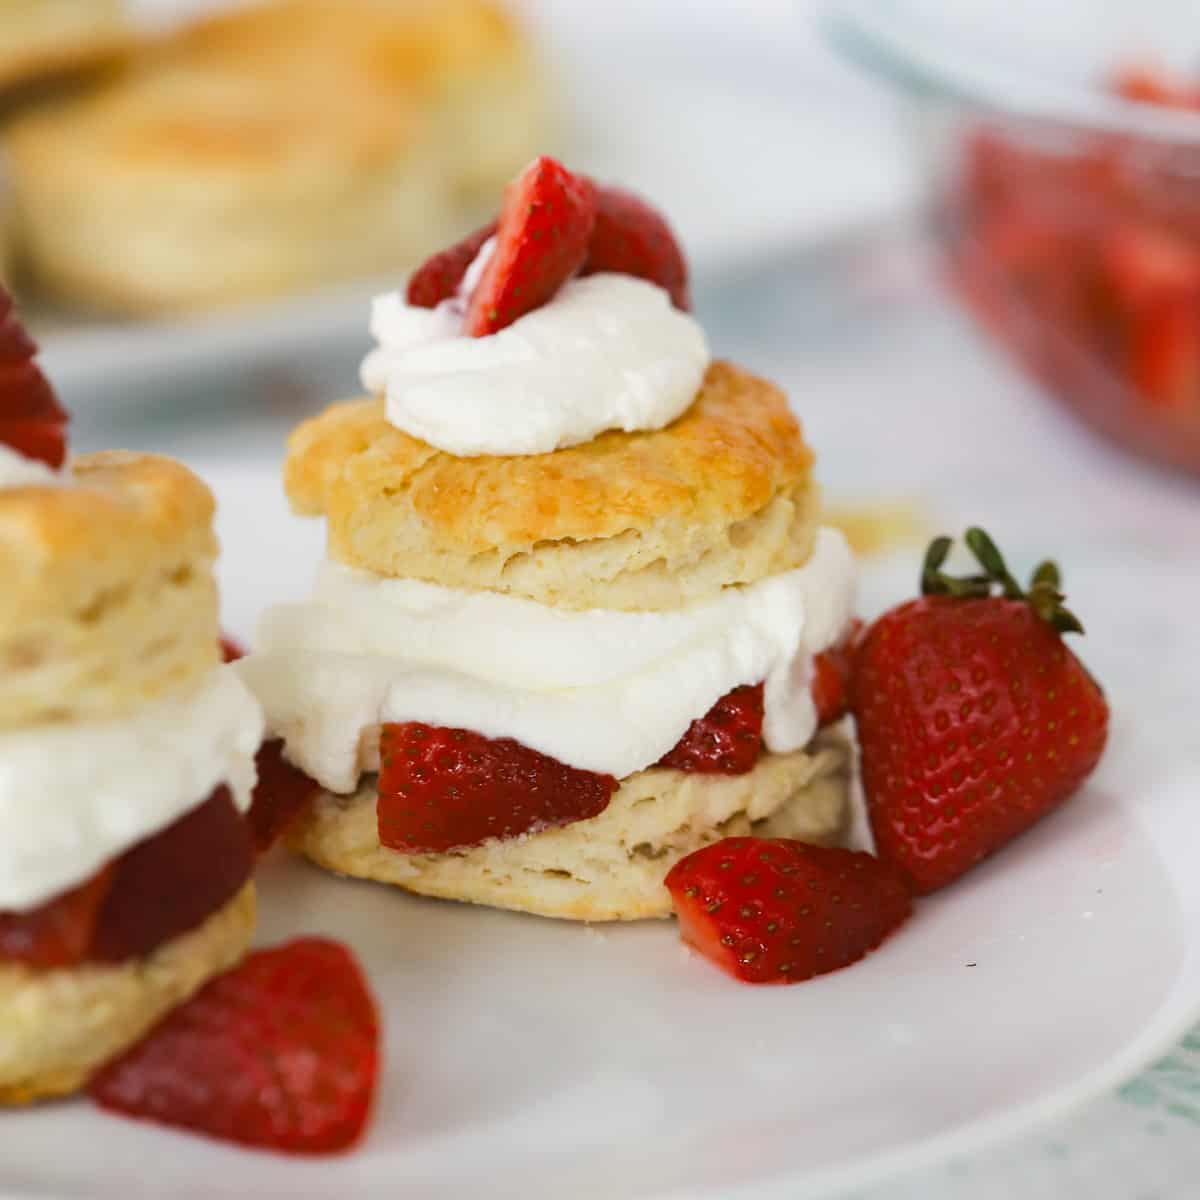 strawberry shortcake biscuit recipe with strawberries and whipped cream recipe